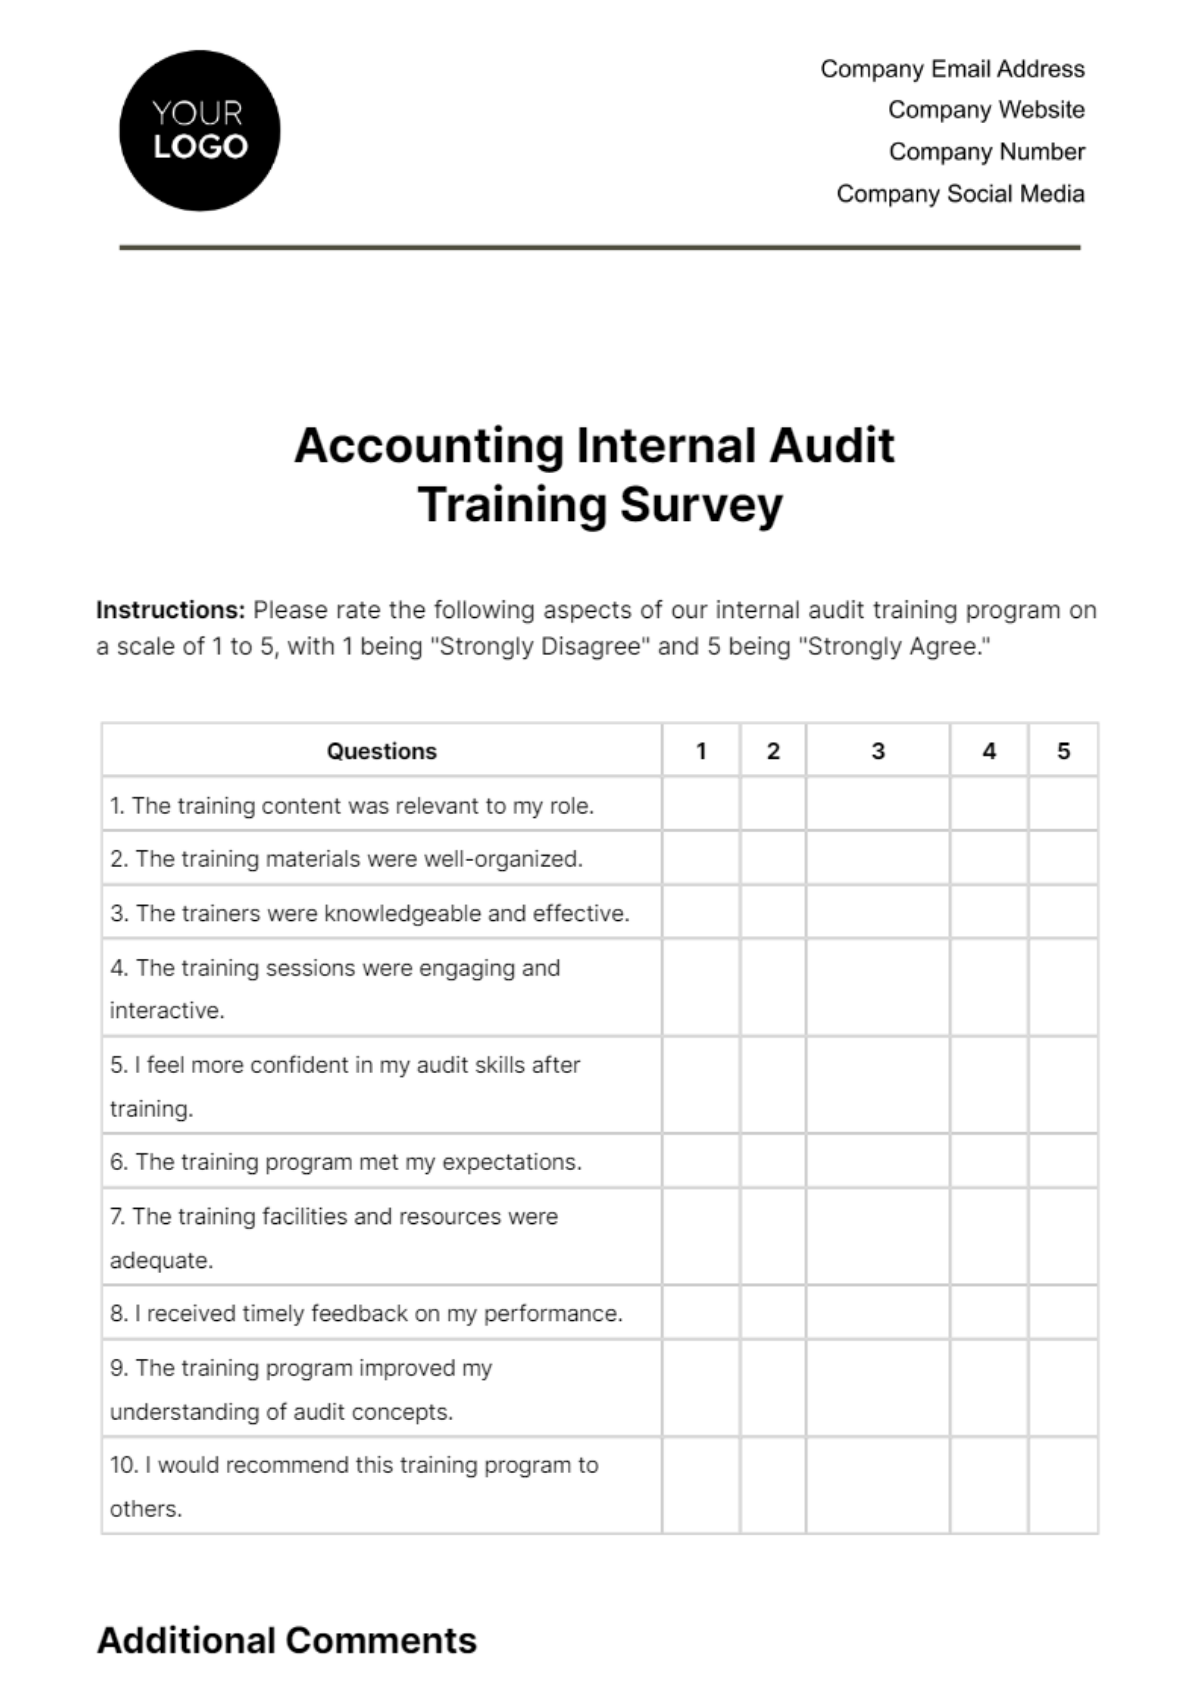 Accounting Internal Audit Training Survey Template